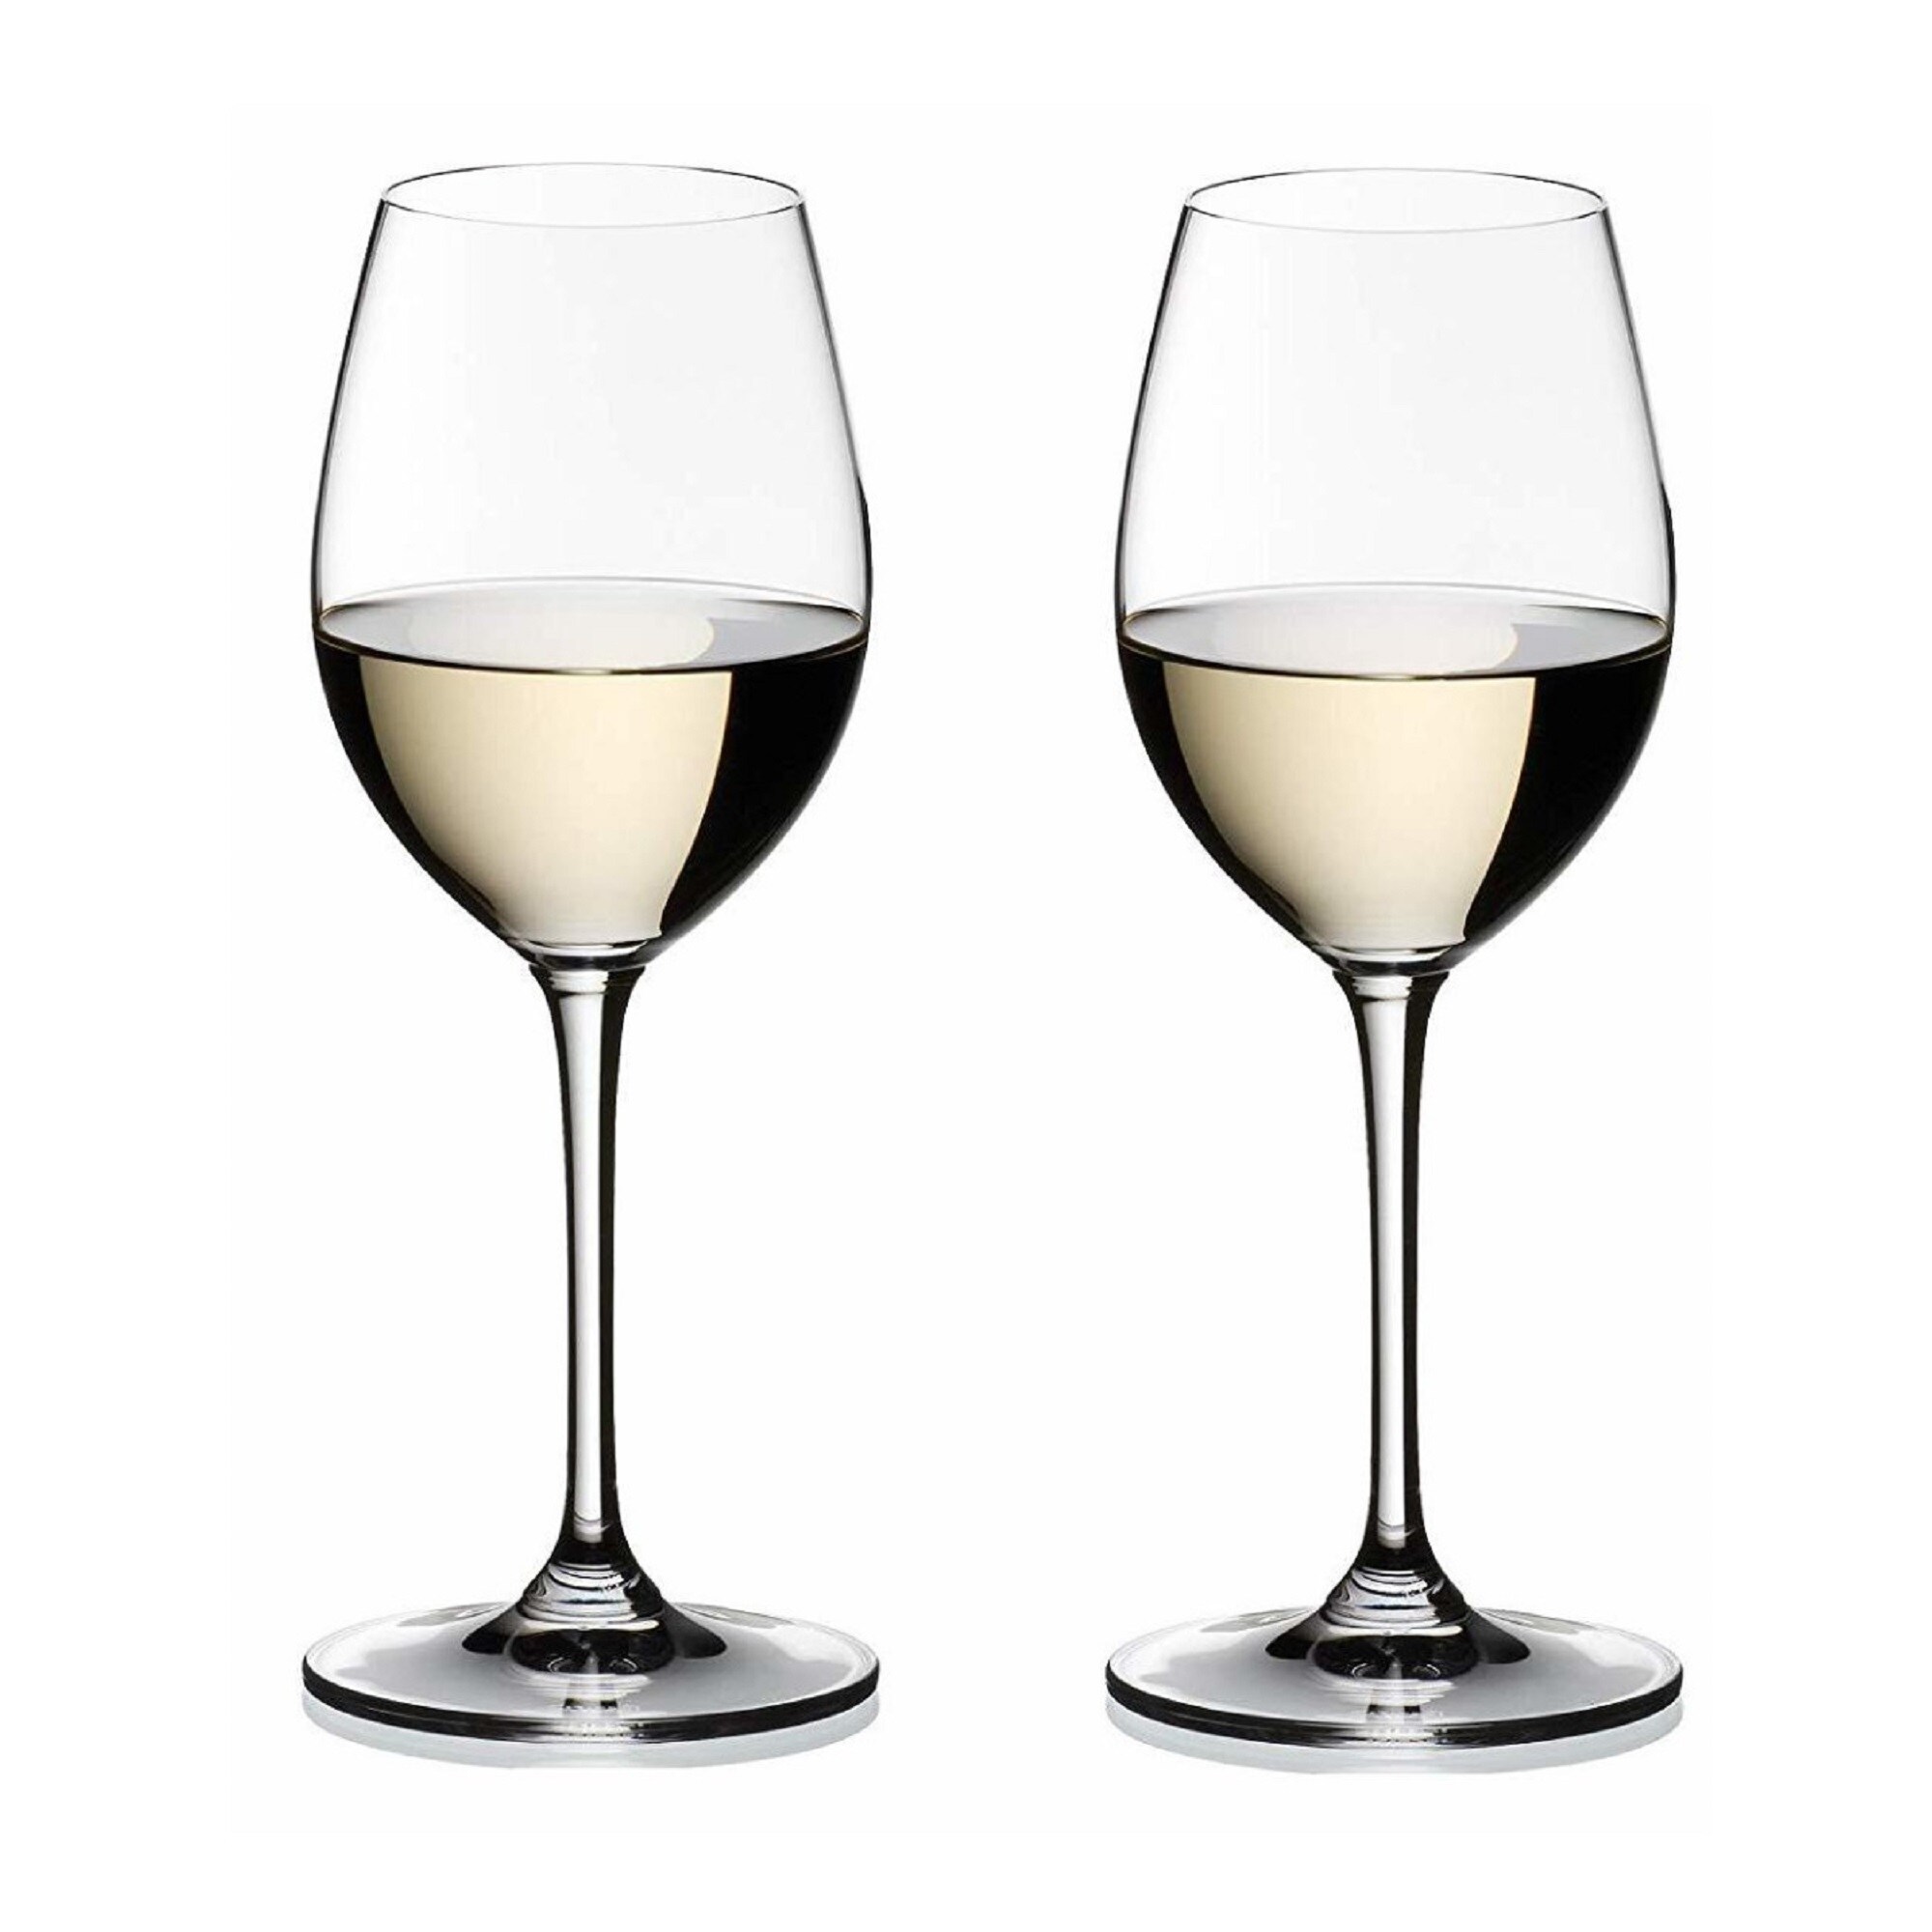 https://ak1.ostkcdn.com/images/products/is/images/direct/989e48805861b8a925fe7d70599671247f4874c4/Riedel-Vinum-Sauvignon-Blanc-Glasses-4-Pack-with-Sealer-%26-Aerator-Set.jpg